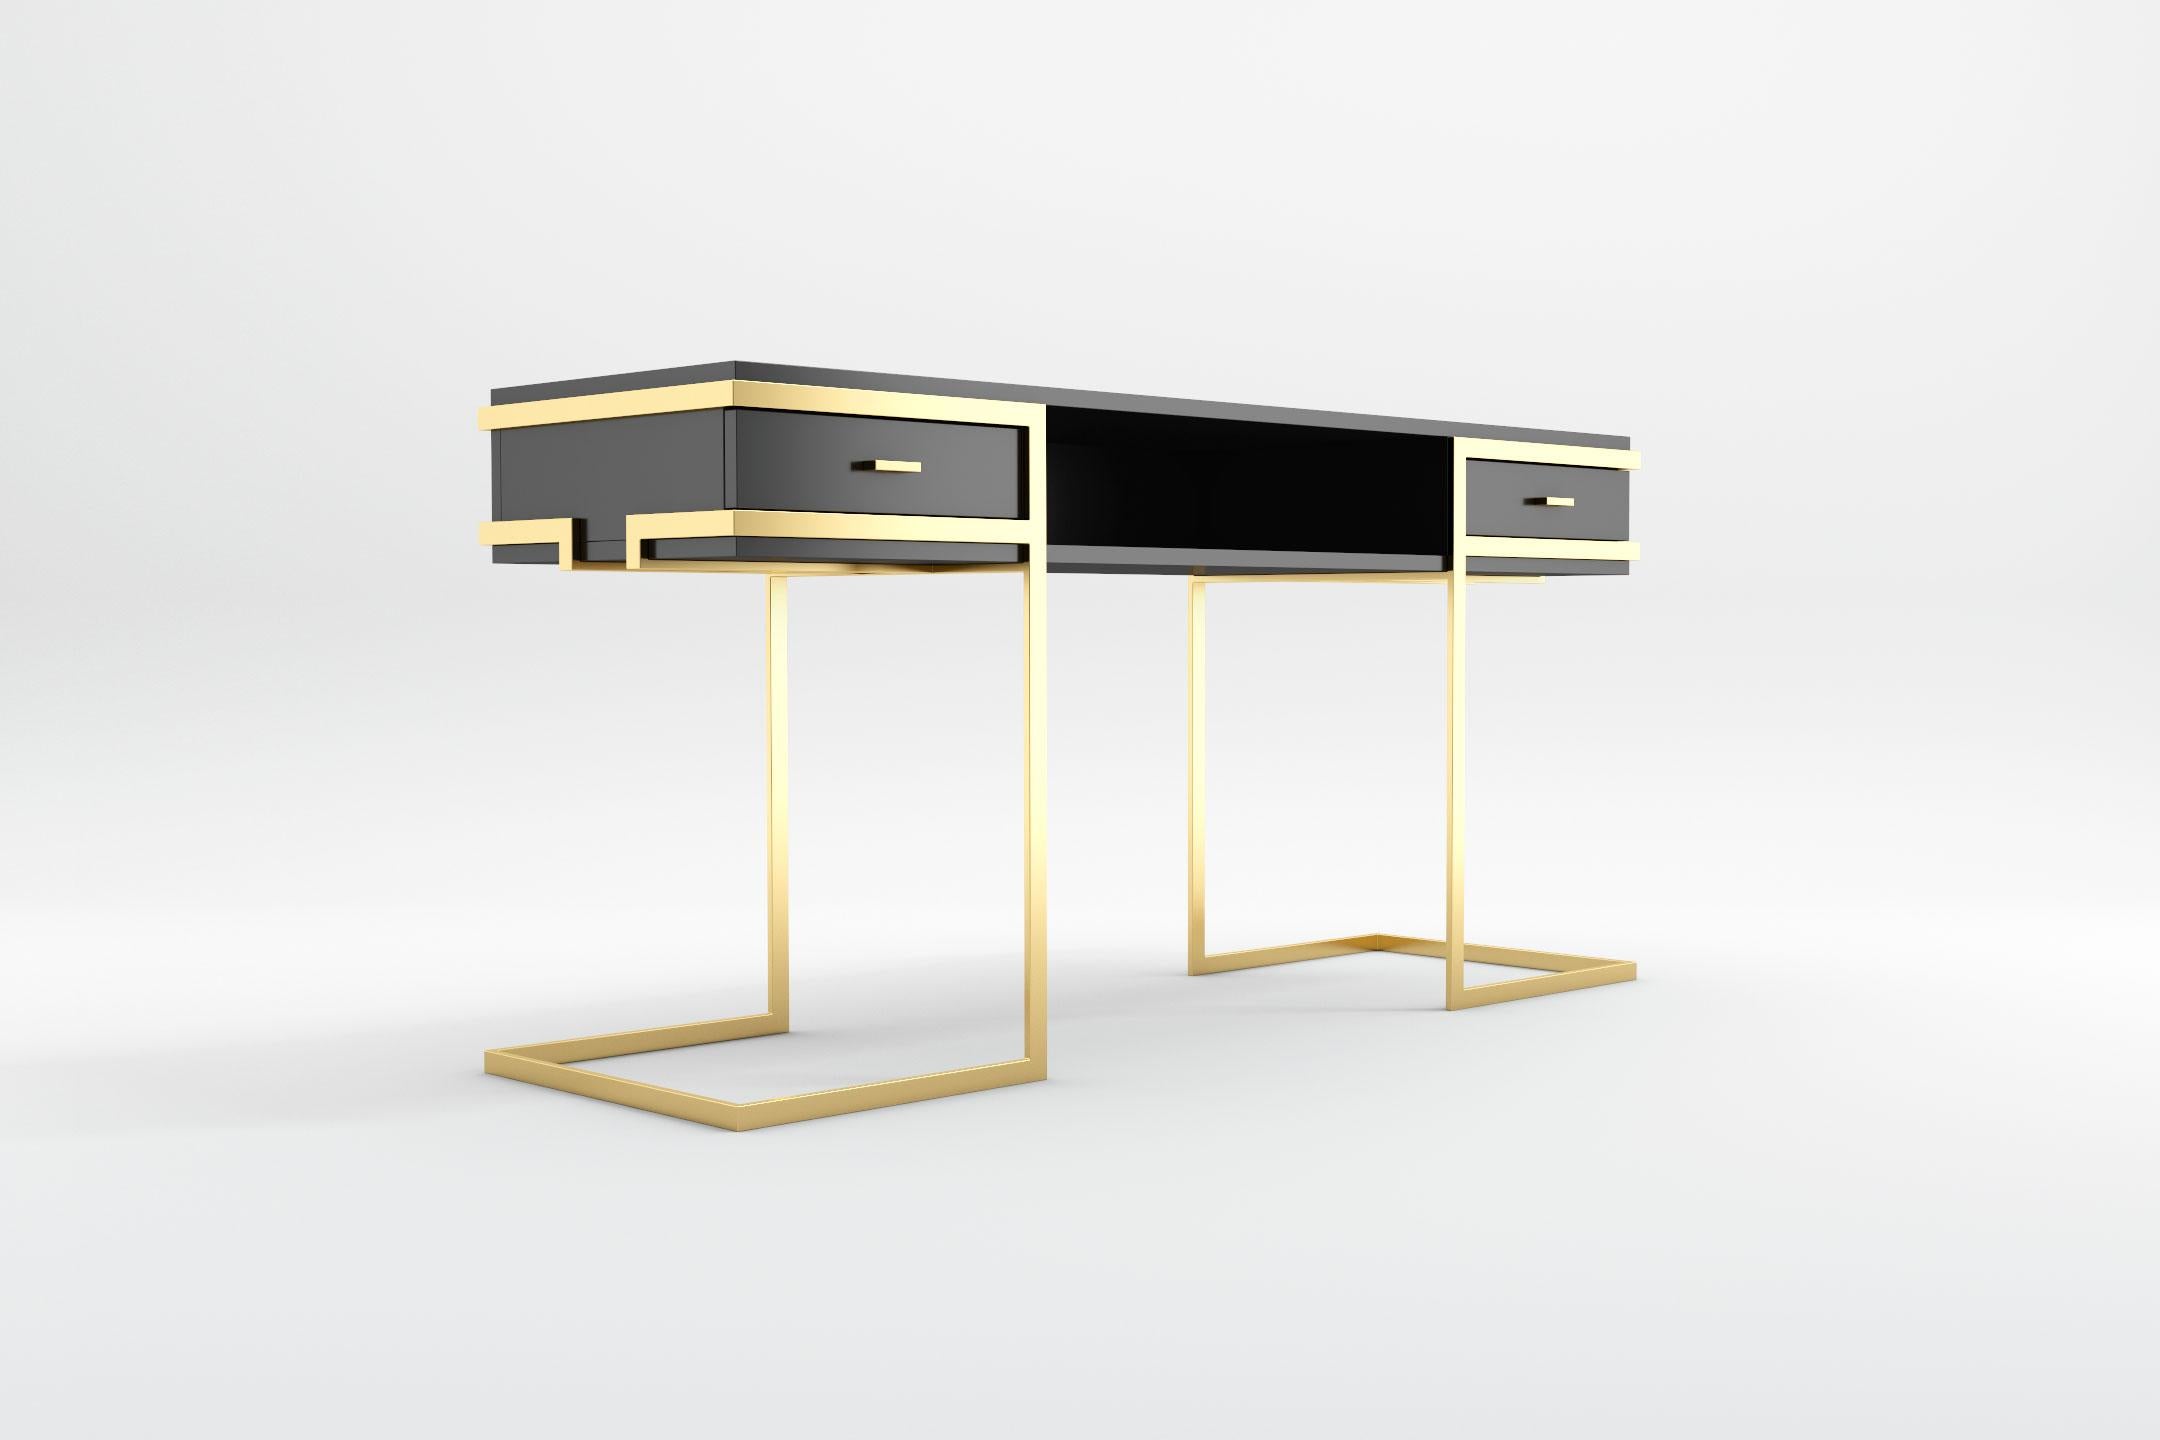 The Elemental collection encloses in its elegant yet simple shapes a minimalist design that blends premium materials and outstanding craftsmanship in a unique design. This piece is built in lacquered solid wood with a polished brass structure and a